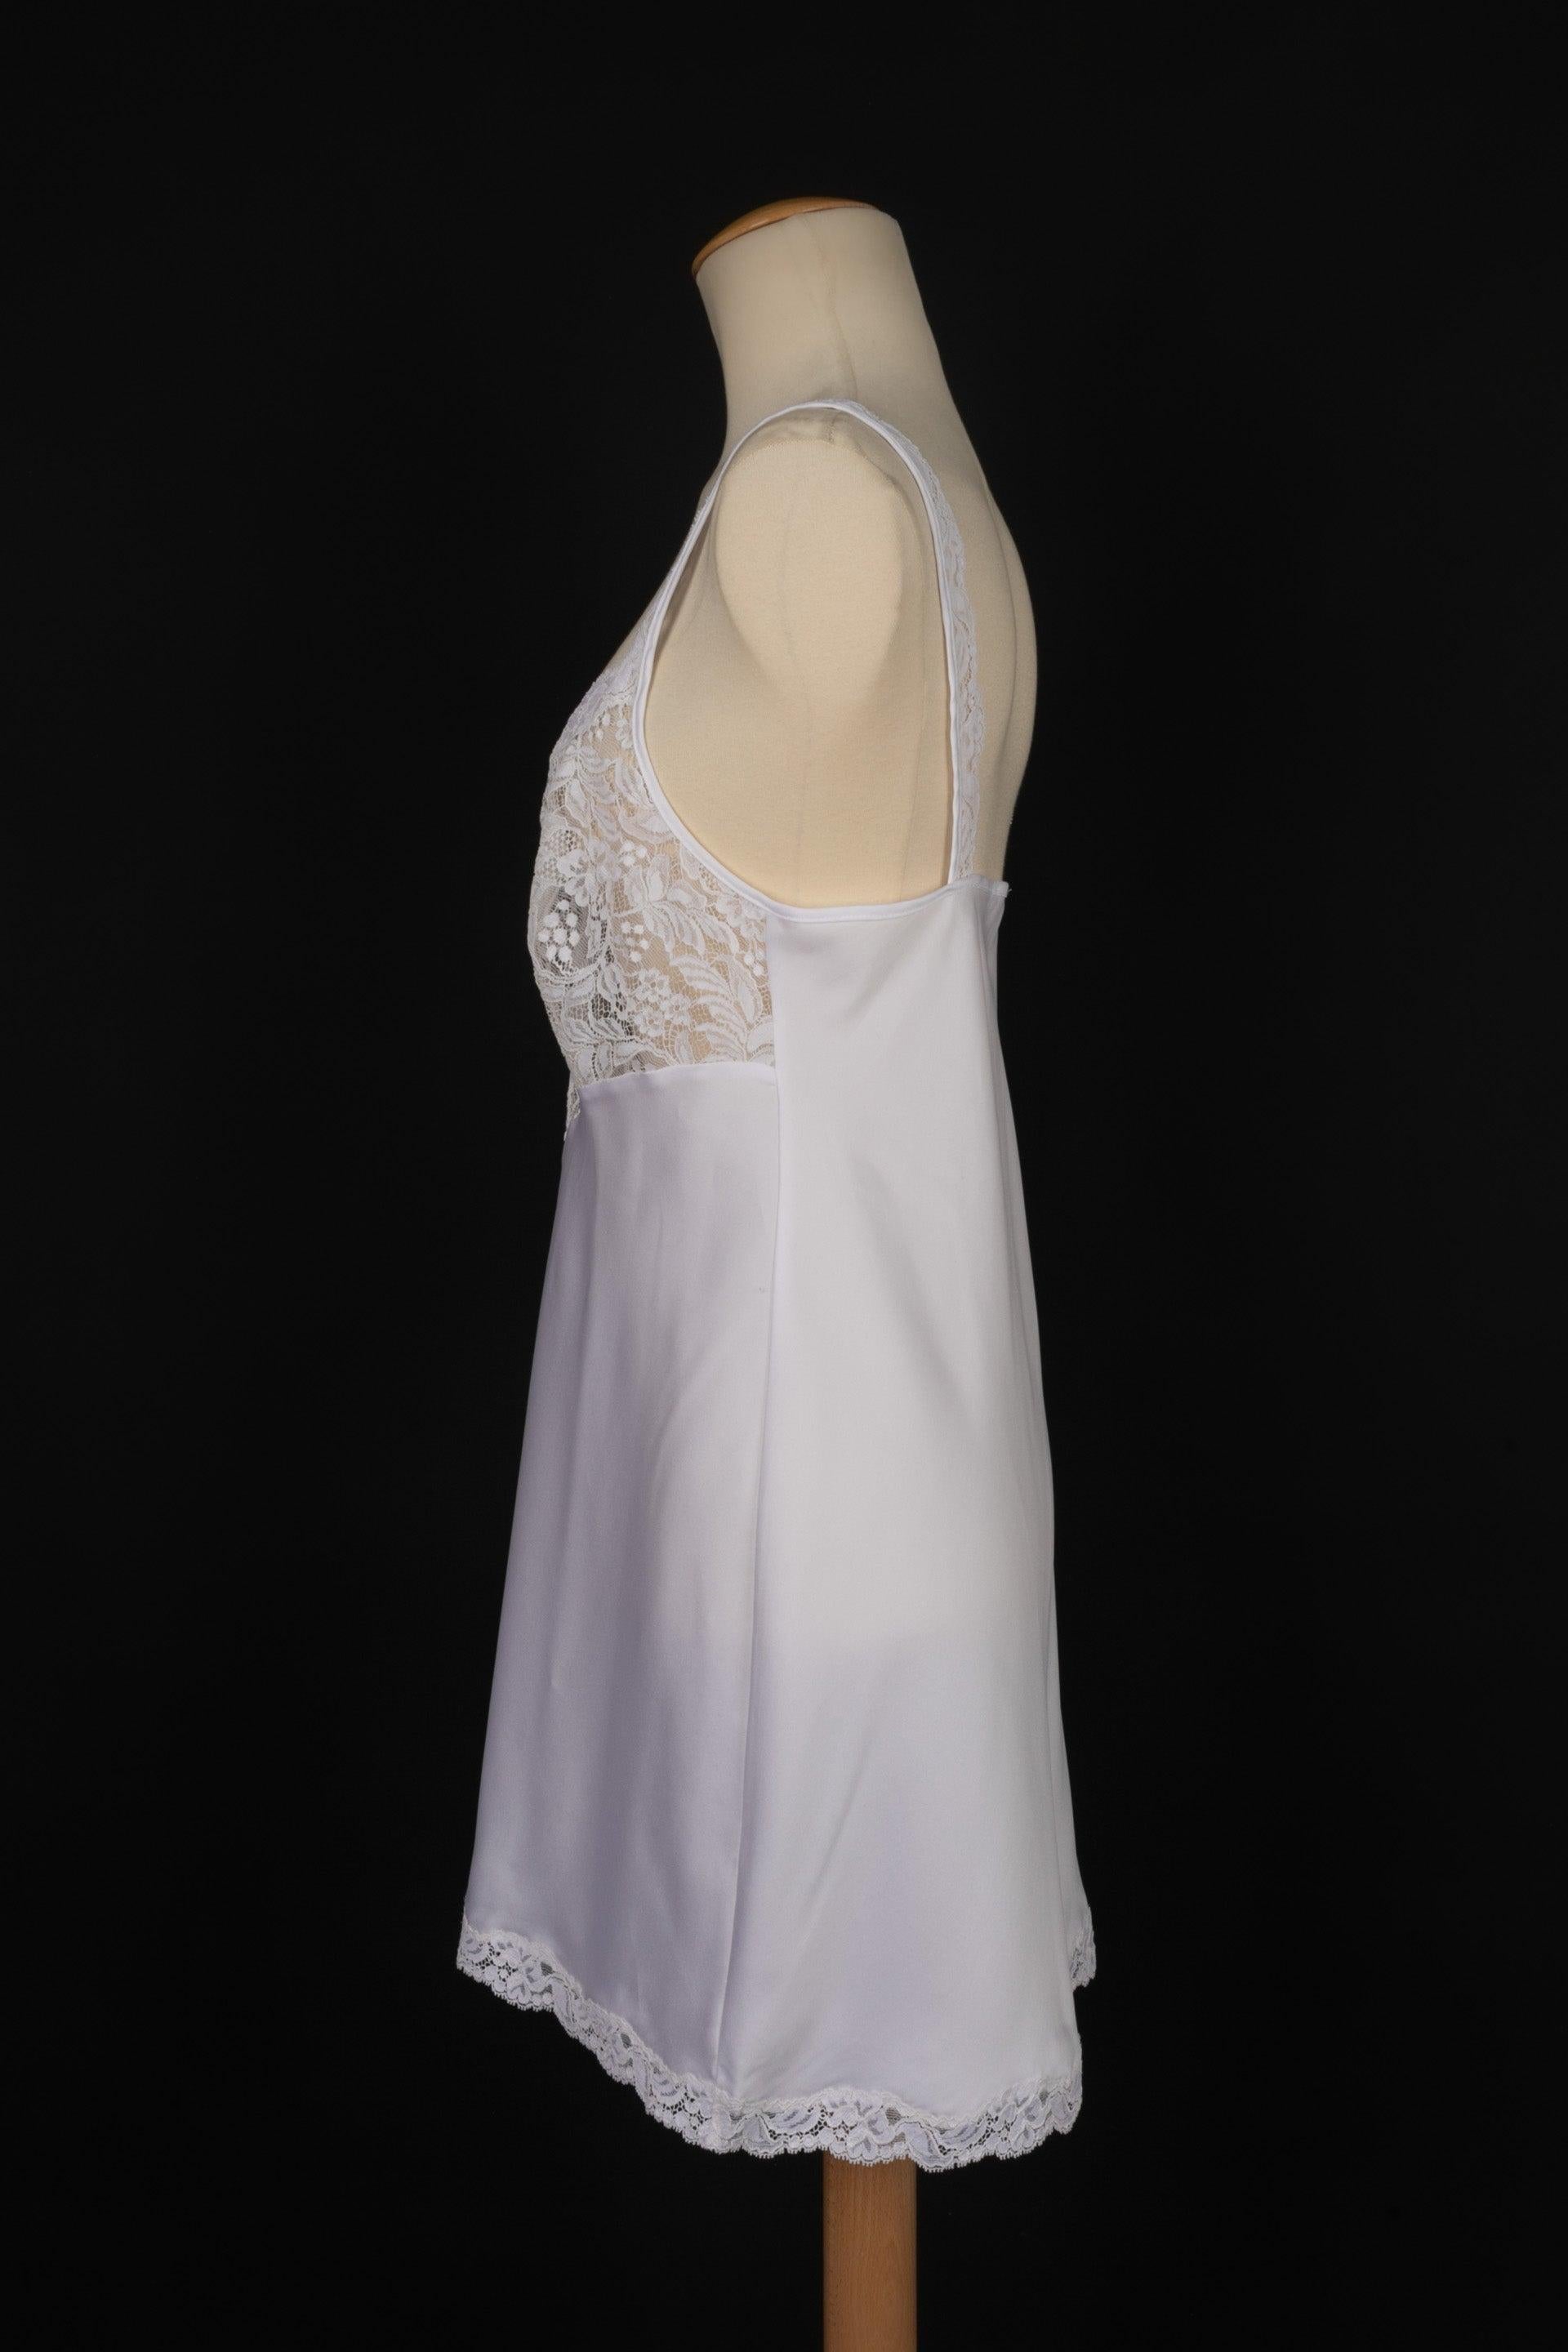 Dior - (Made in France) White lace babydoll. Size 44FR.

Additional information:
Condition: Very good condition
Dimensions: Chest: 45 cm - Length: 81 cm

Seller Reference: VR284
